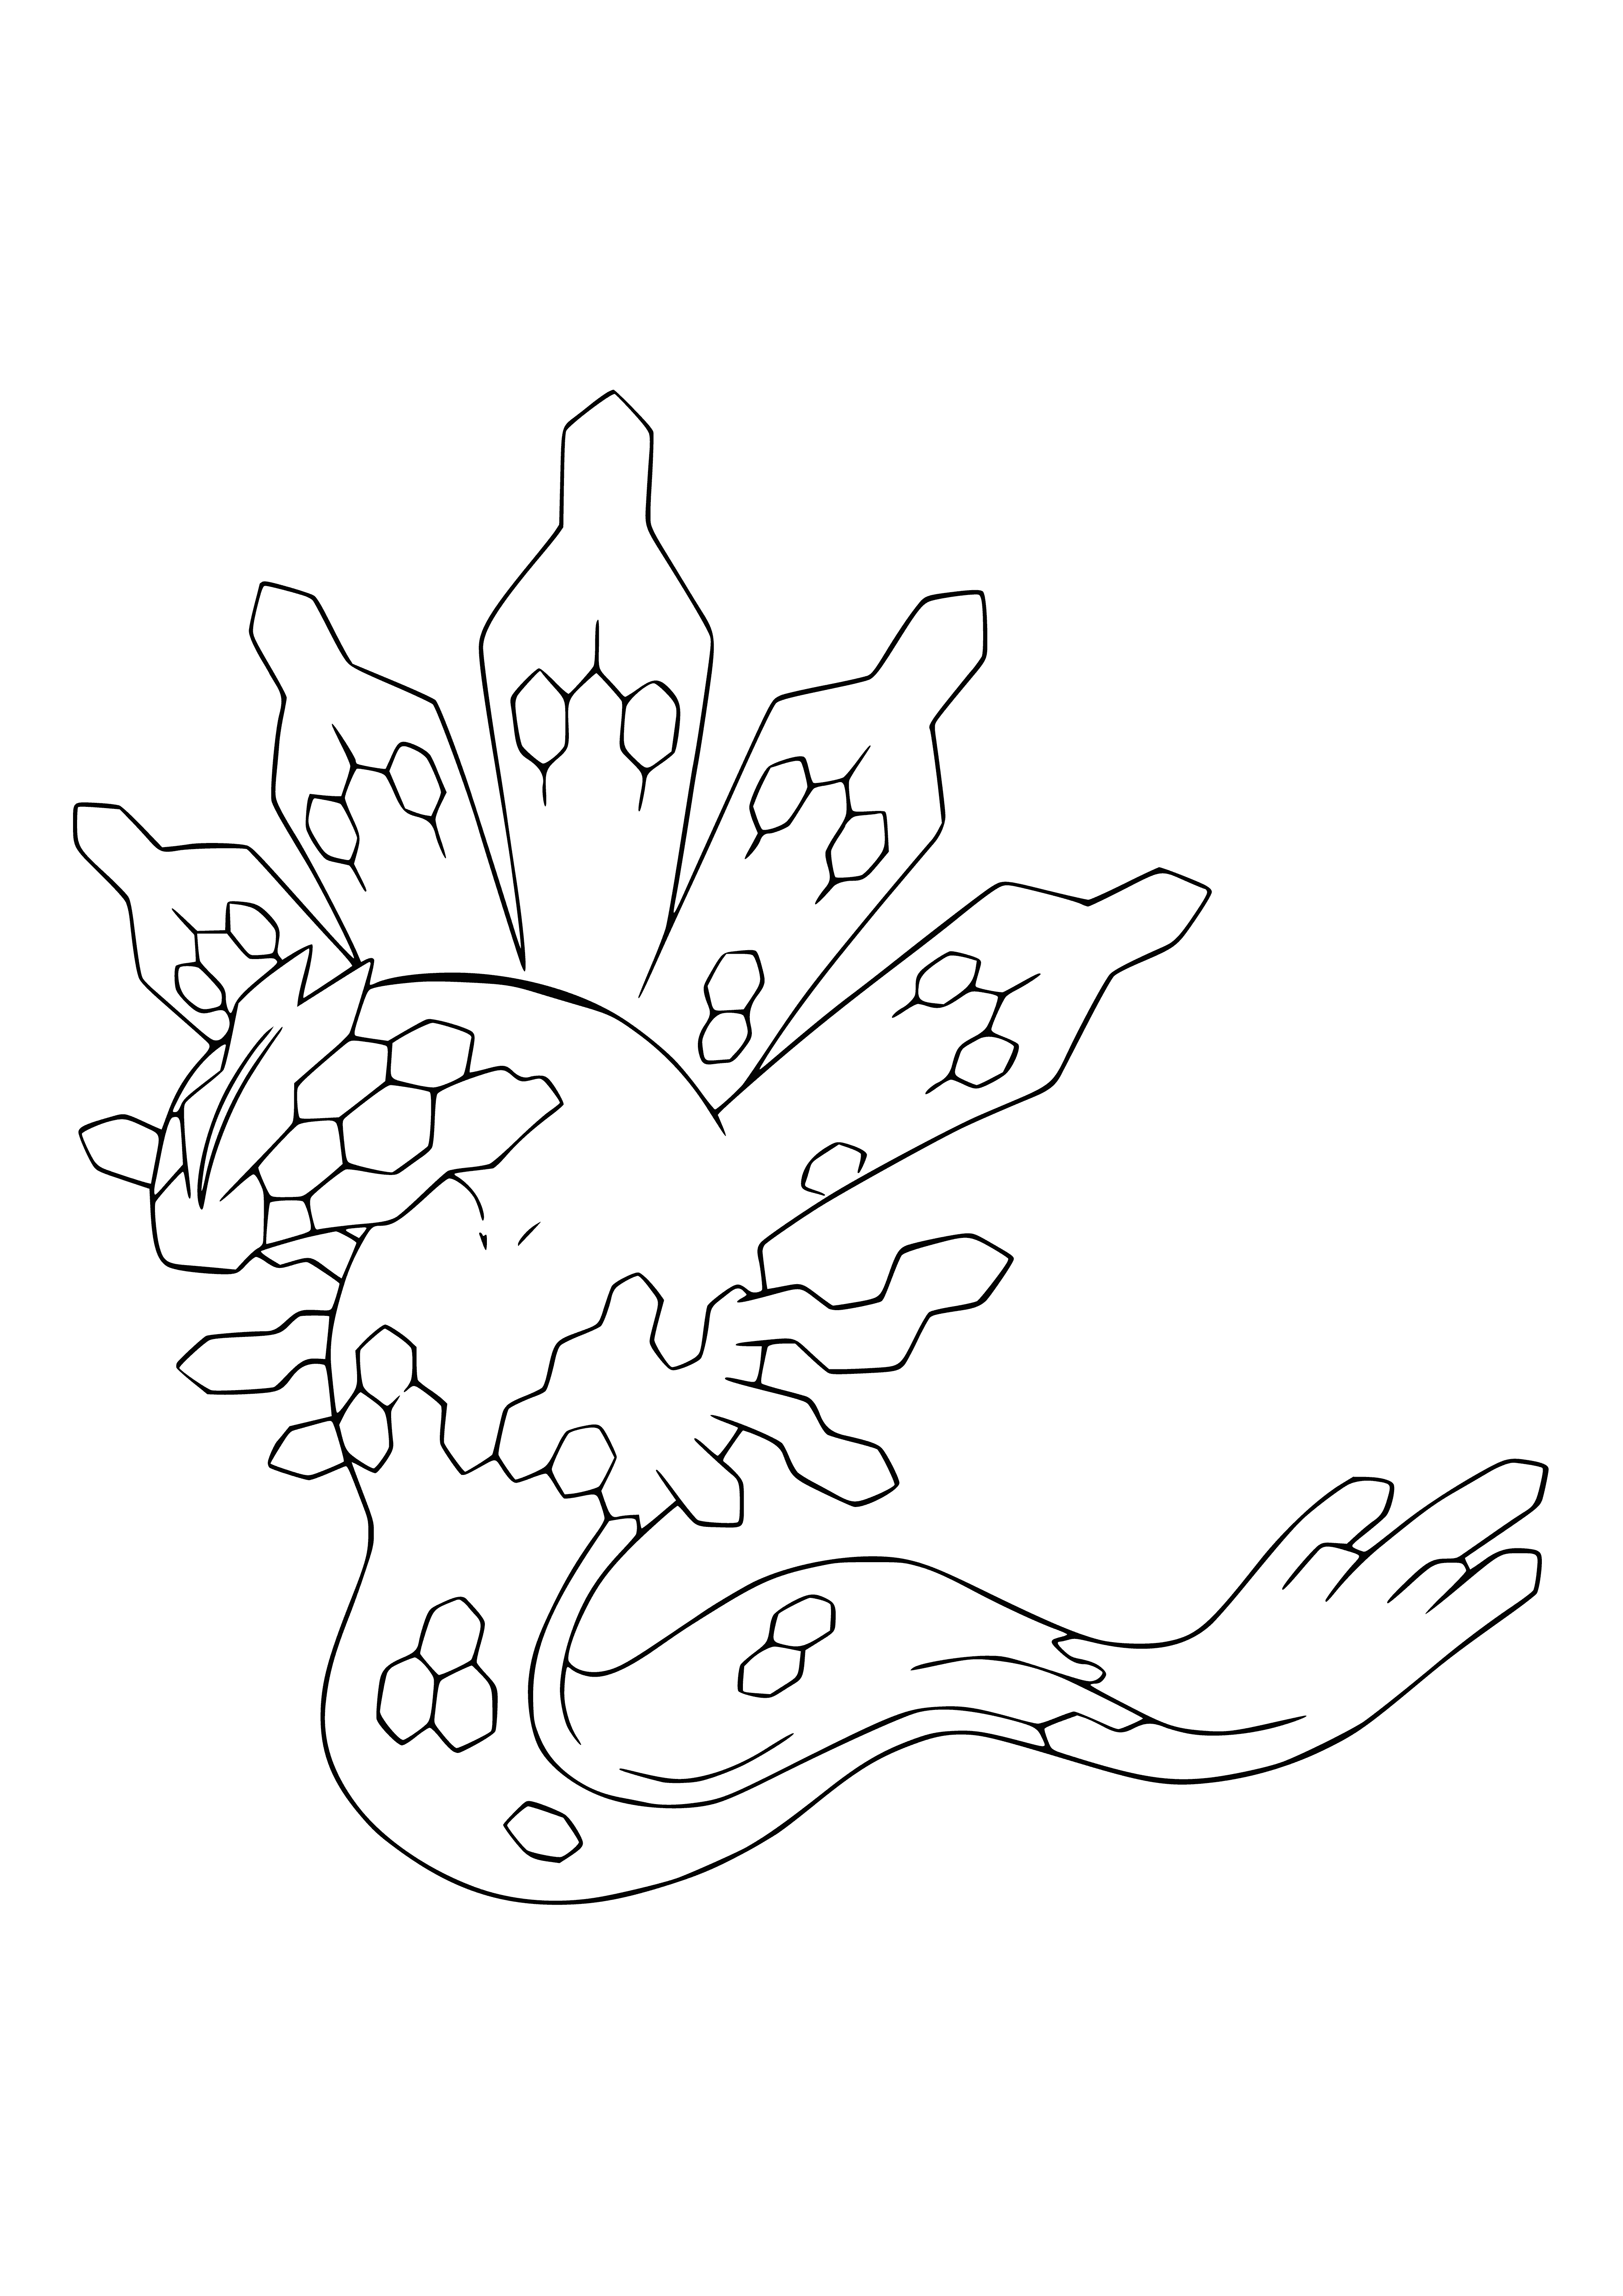 coloring page: Large, lizard-like Pokemon Zygarde has green/black body, yellow underside, long tail, large head w/ red eyes, 2 large black horns.